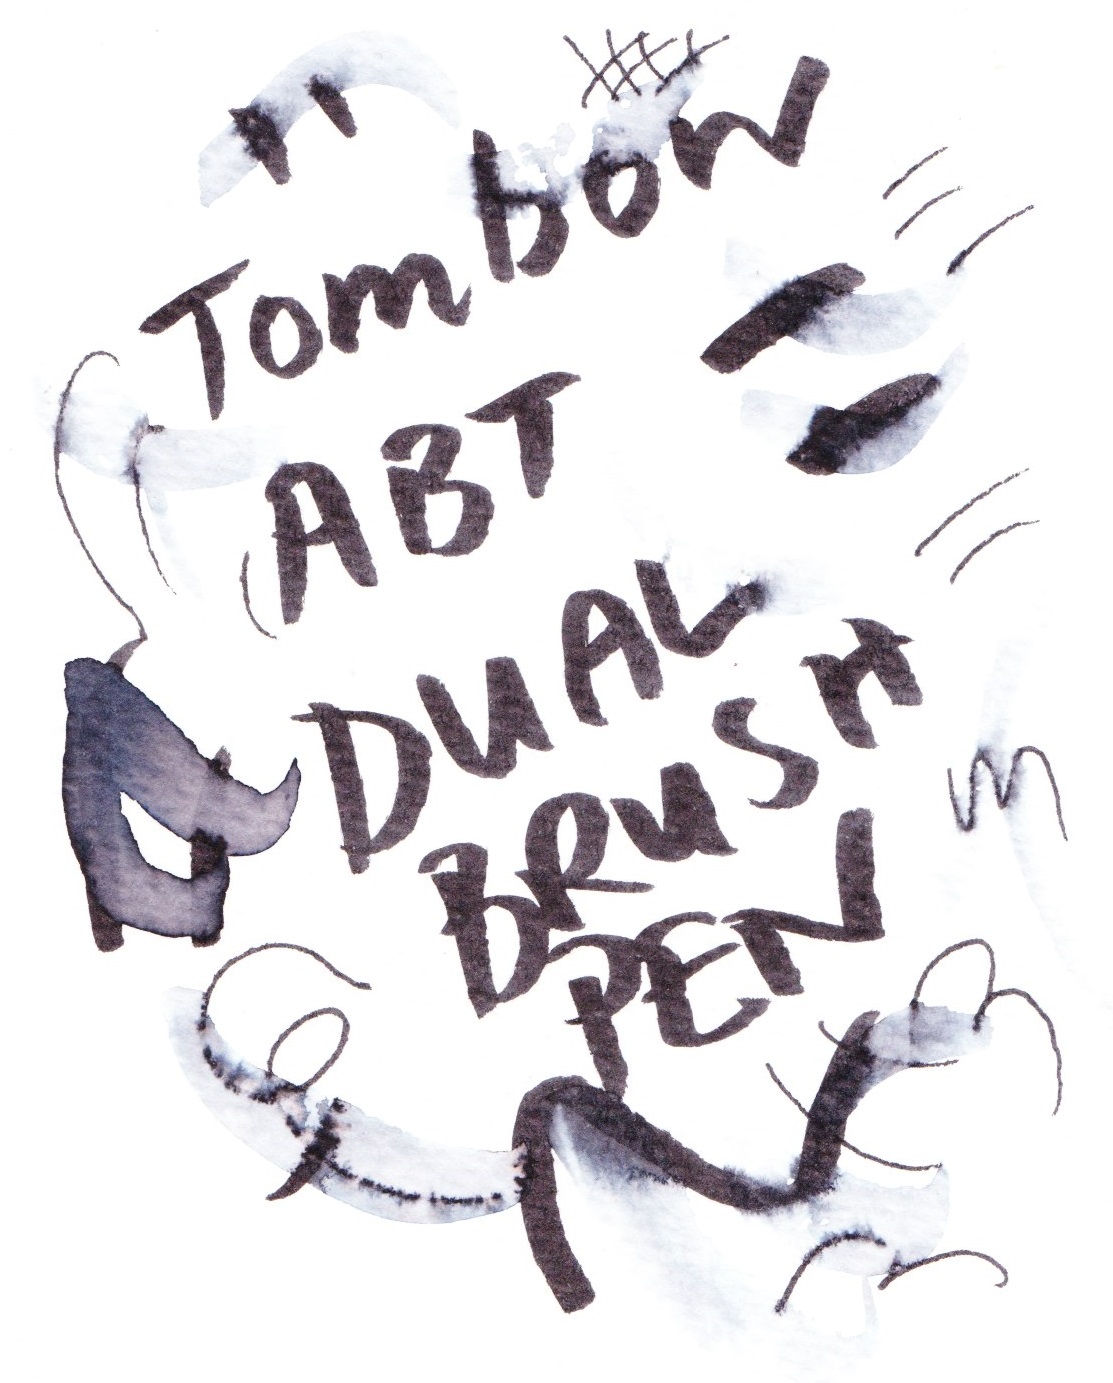 Tombow Dual Tip Blendable Brush Pen dilute on cold pressed paper